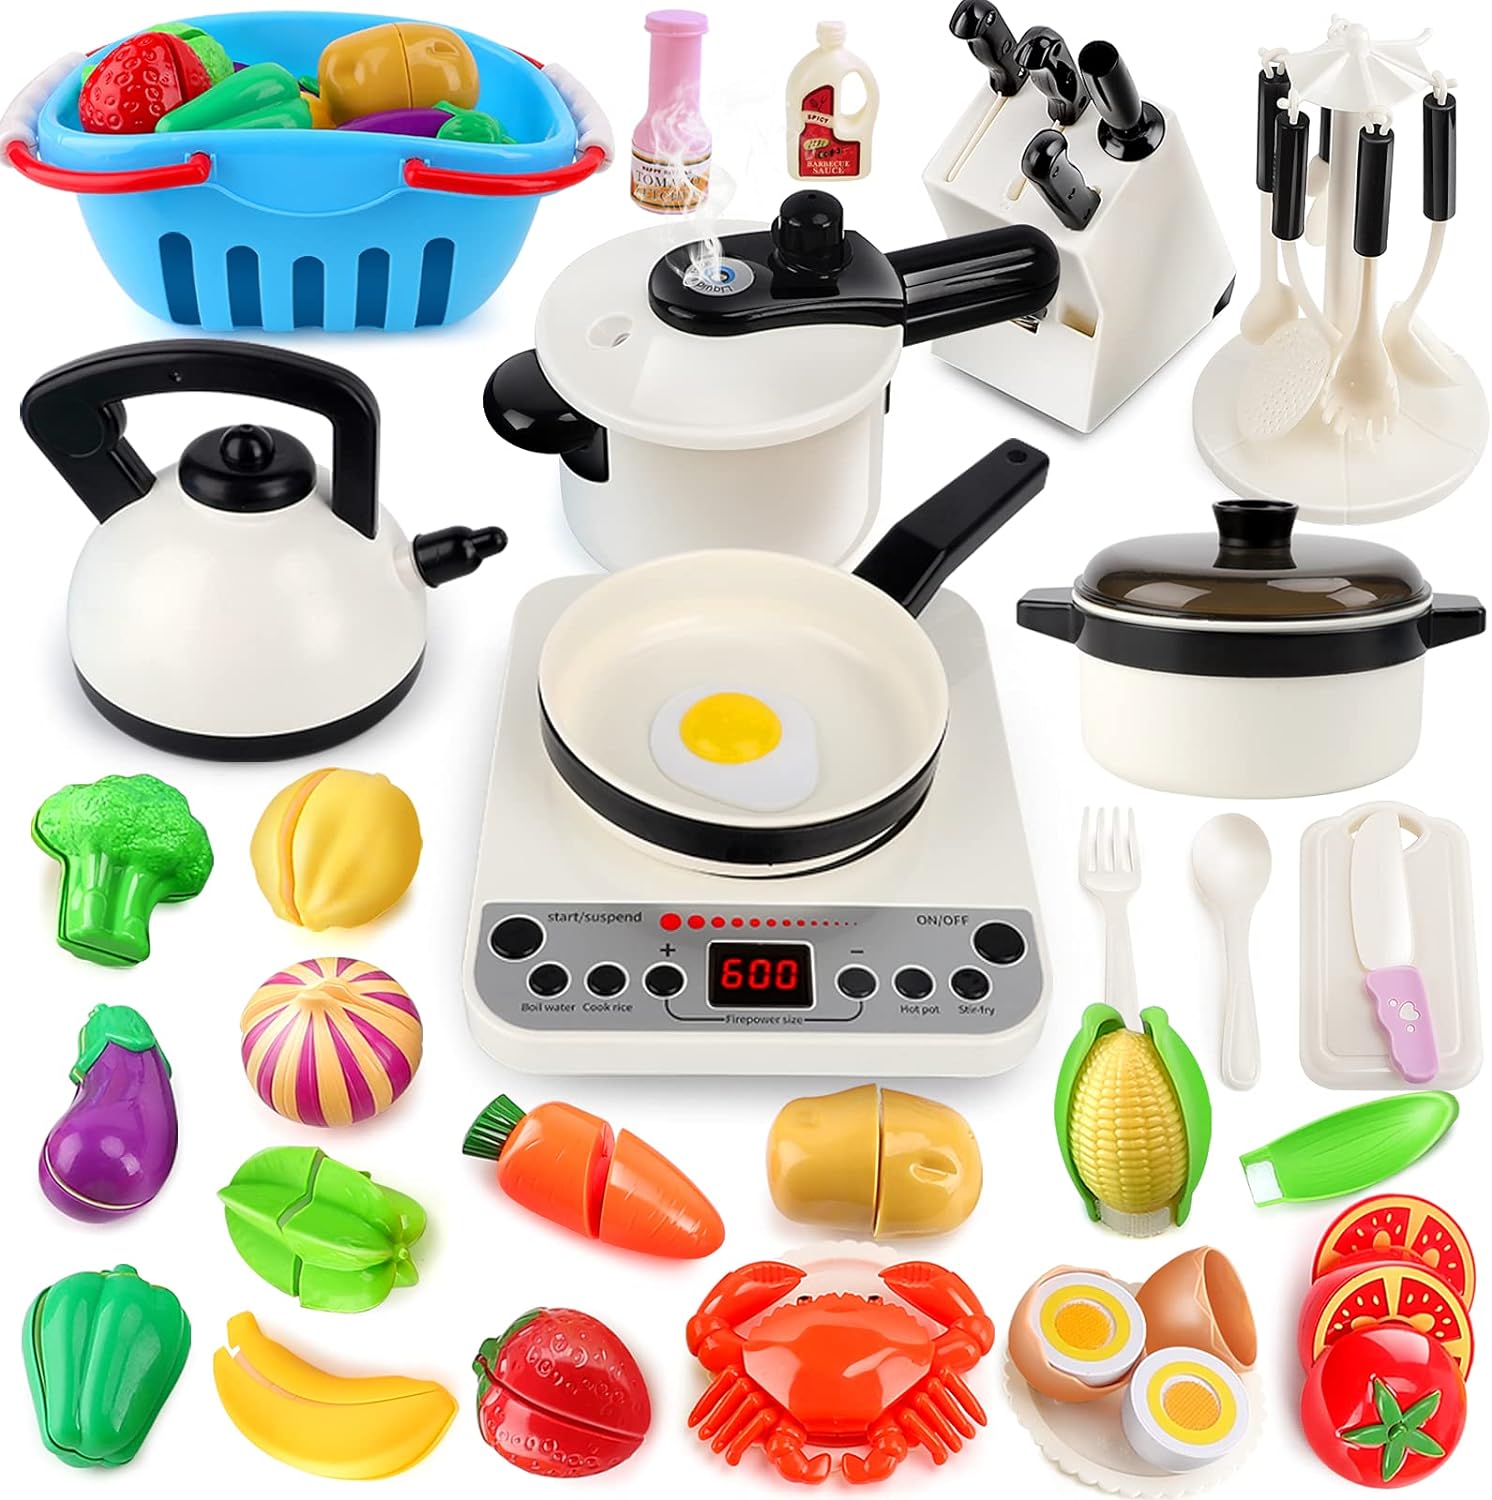 Aomola Kitchen Toys,Kids Kitchen PlaySet with Electronic Induction Cooktop,  Steam Pressure Pot,Cookware,Pretend Play Kitchen Accessories,Cut Play ...